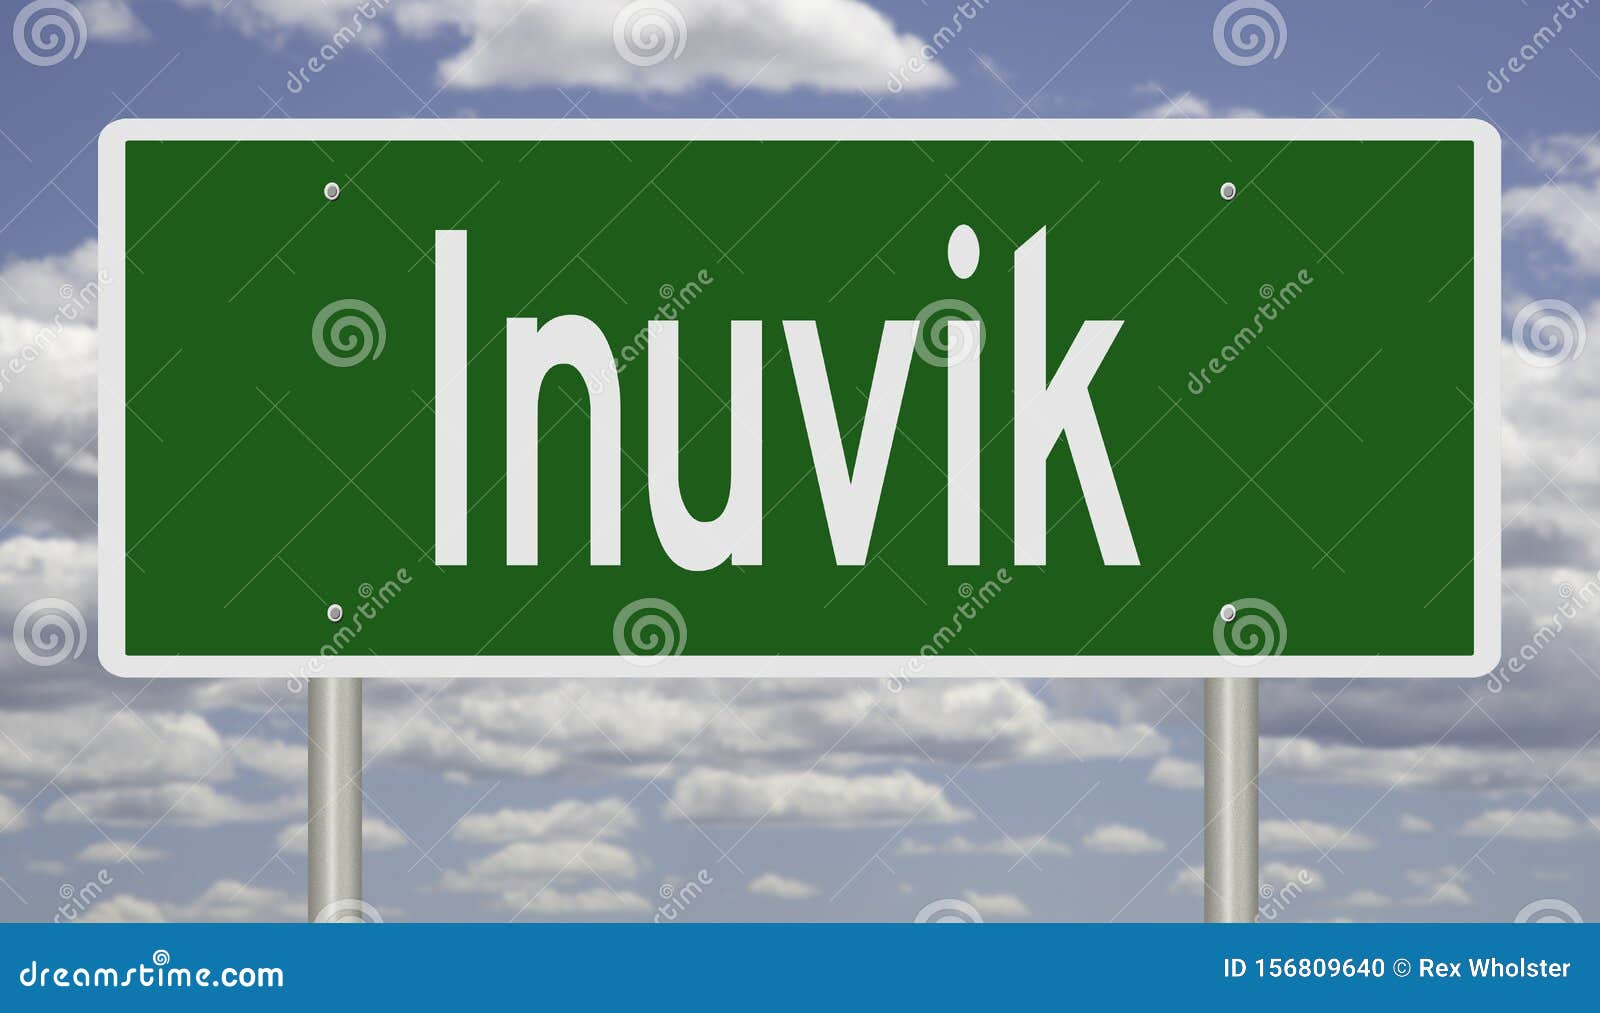 highway sign for inuvik northwest territories canada